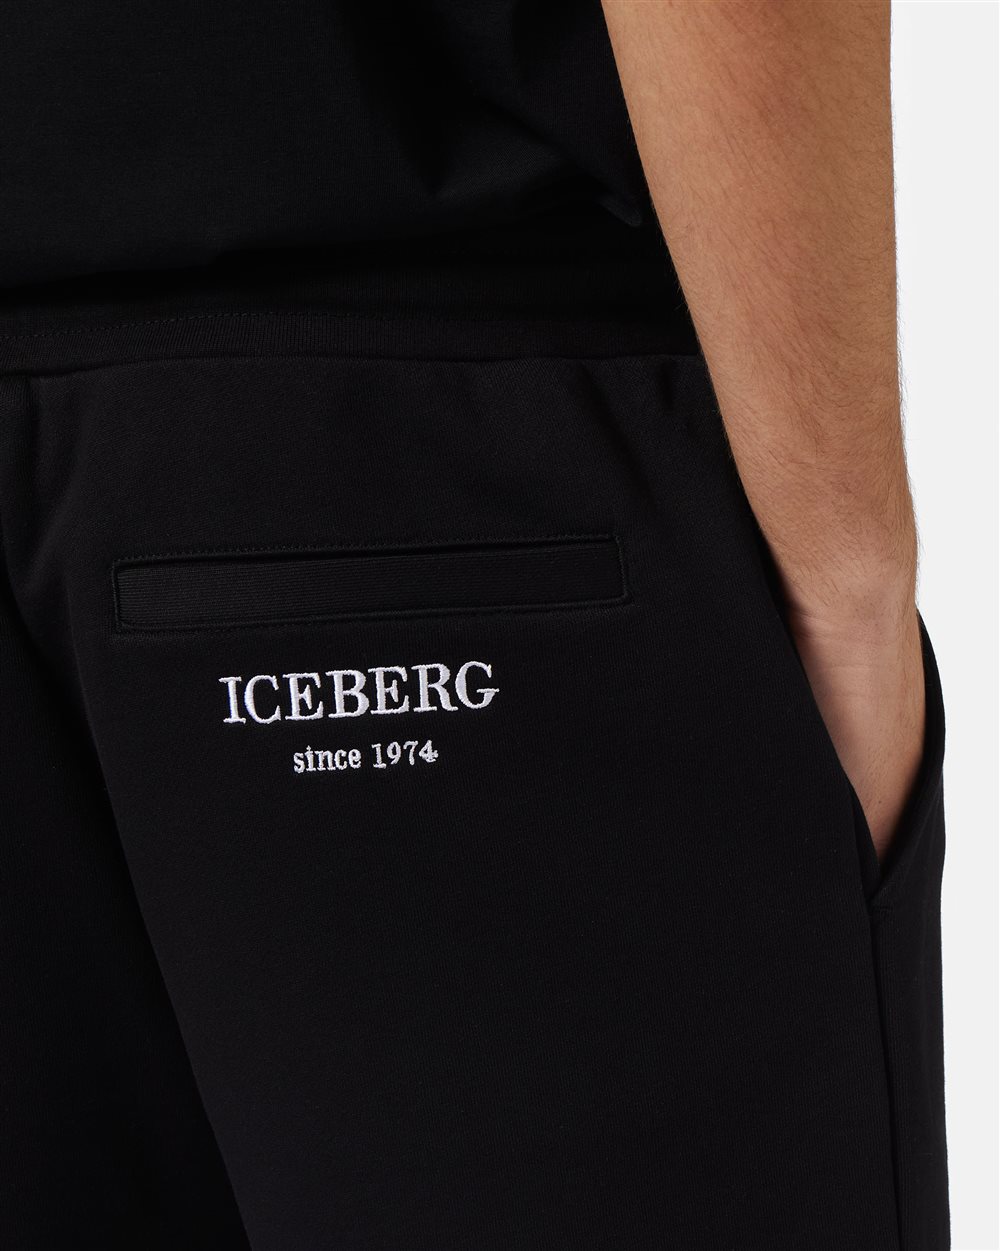 Bermuda sportive con coulisse - Iceberg - Official Website